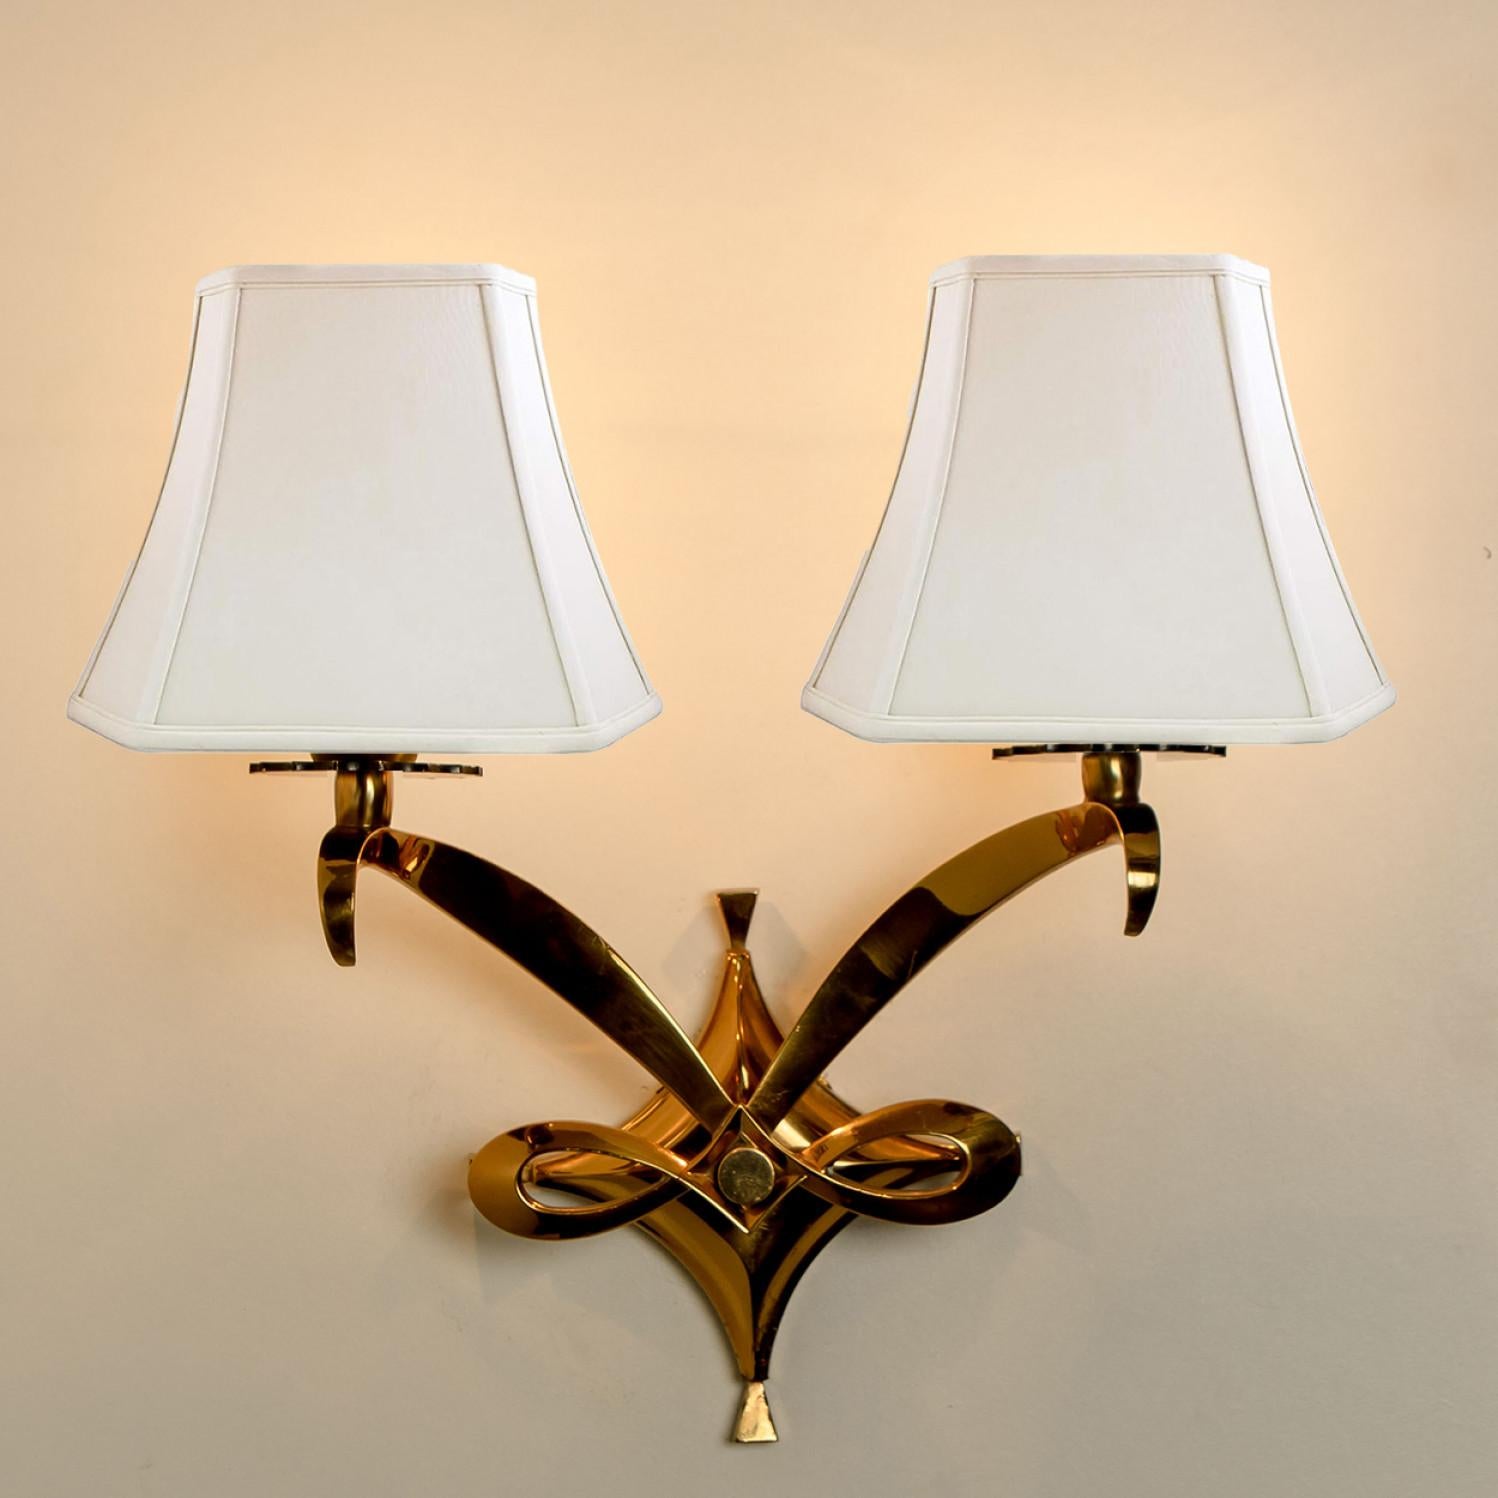 Pair of Brass Wall Sconces, Leleu, 1960 In Good Condition For Sale In Rijssen, NL